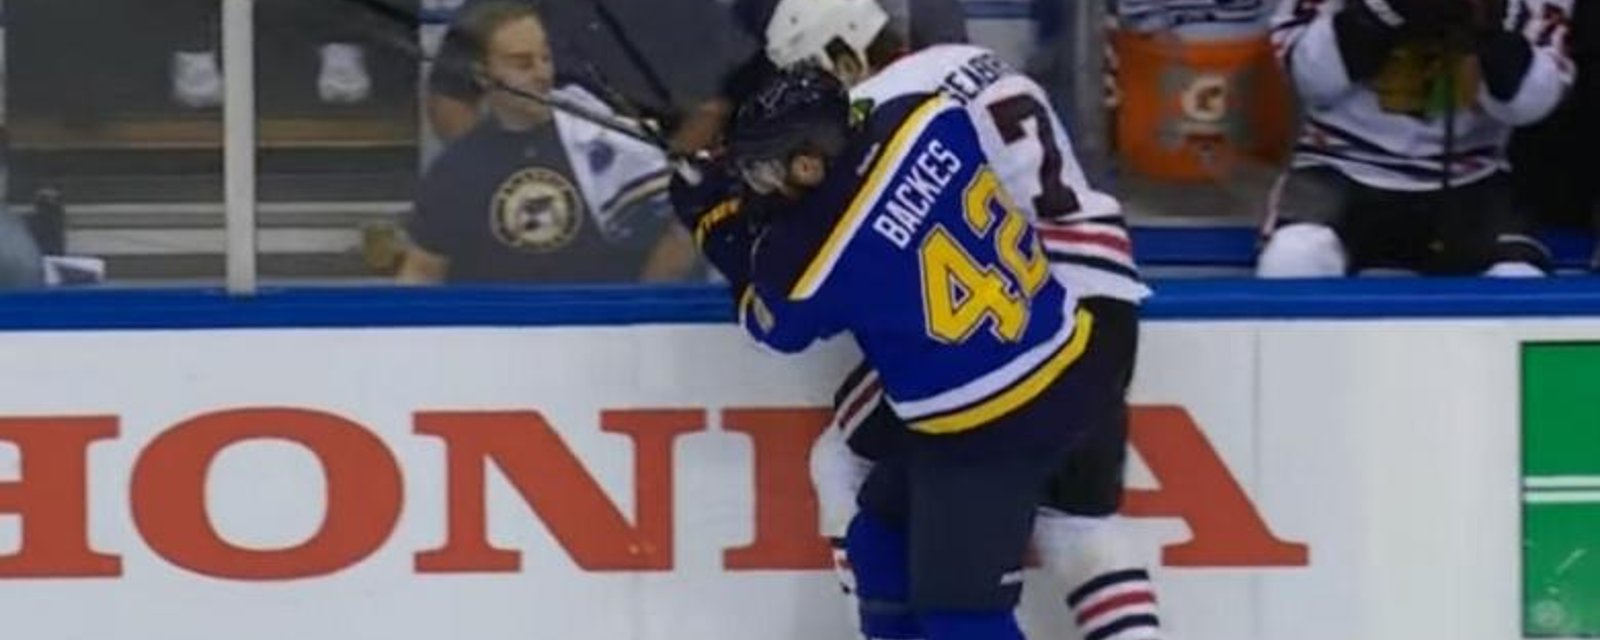 Hit from Backes breaks the glass just 26 seconds into the game.